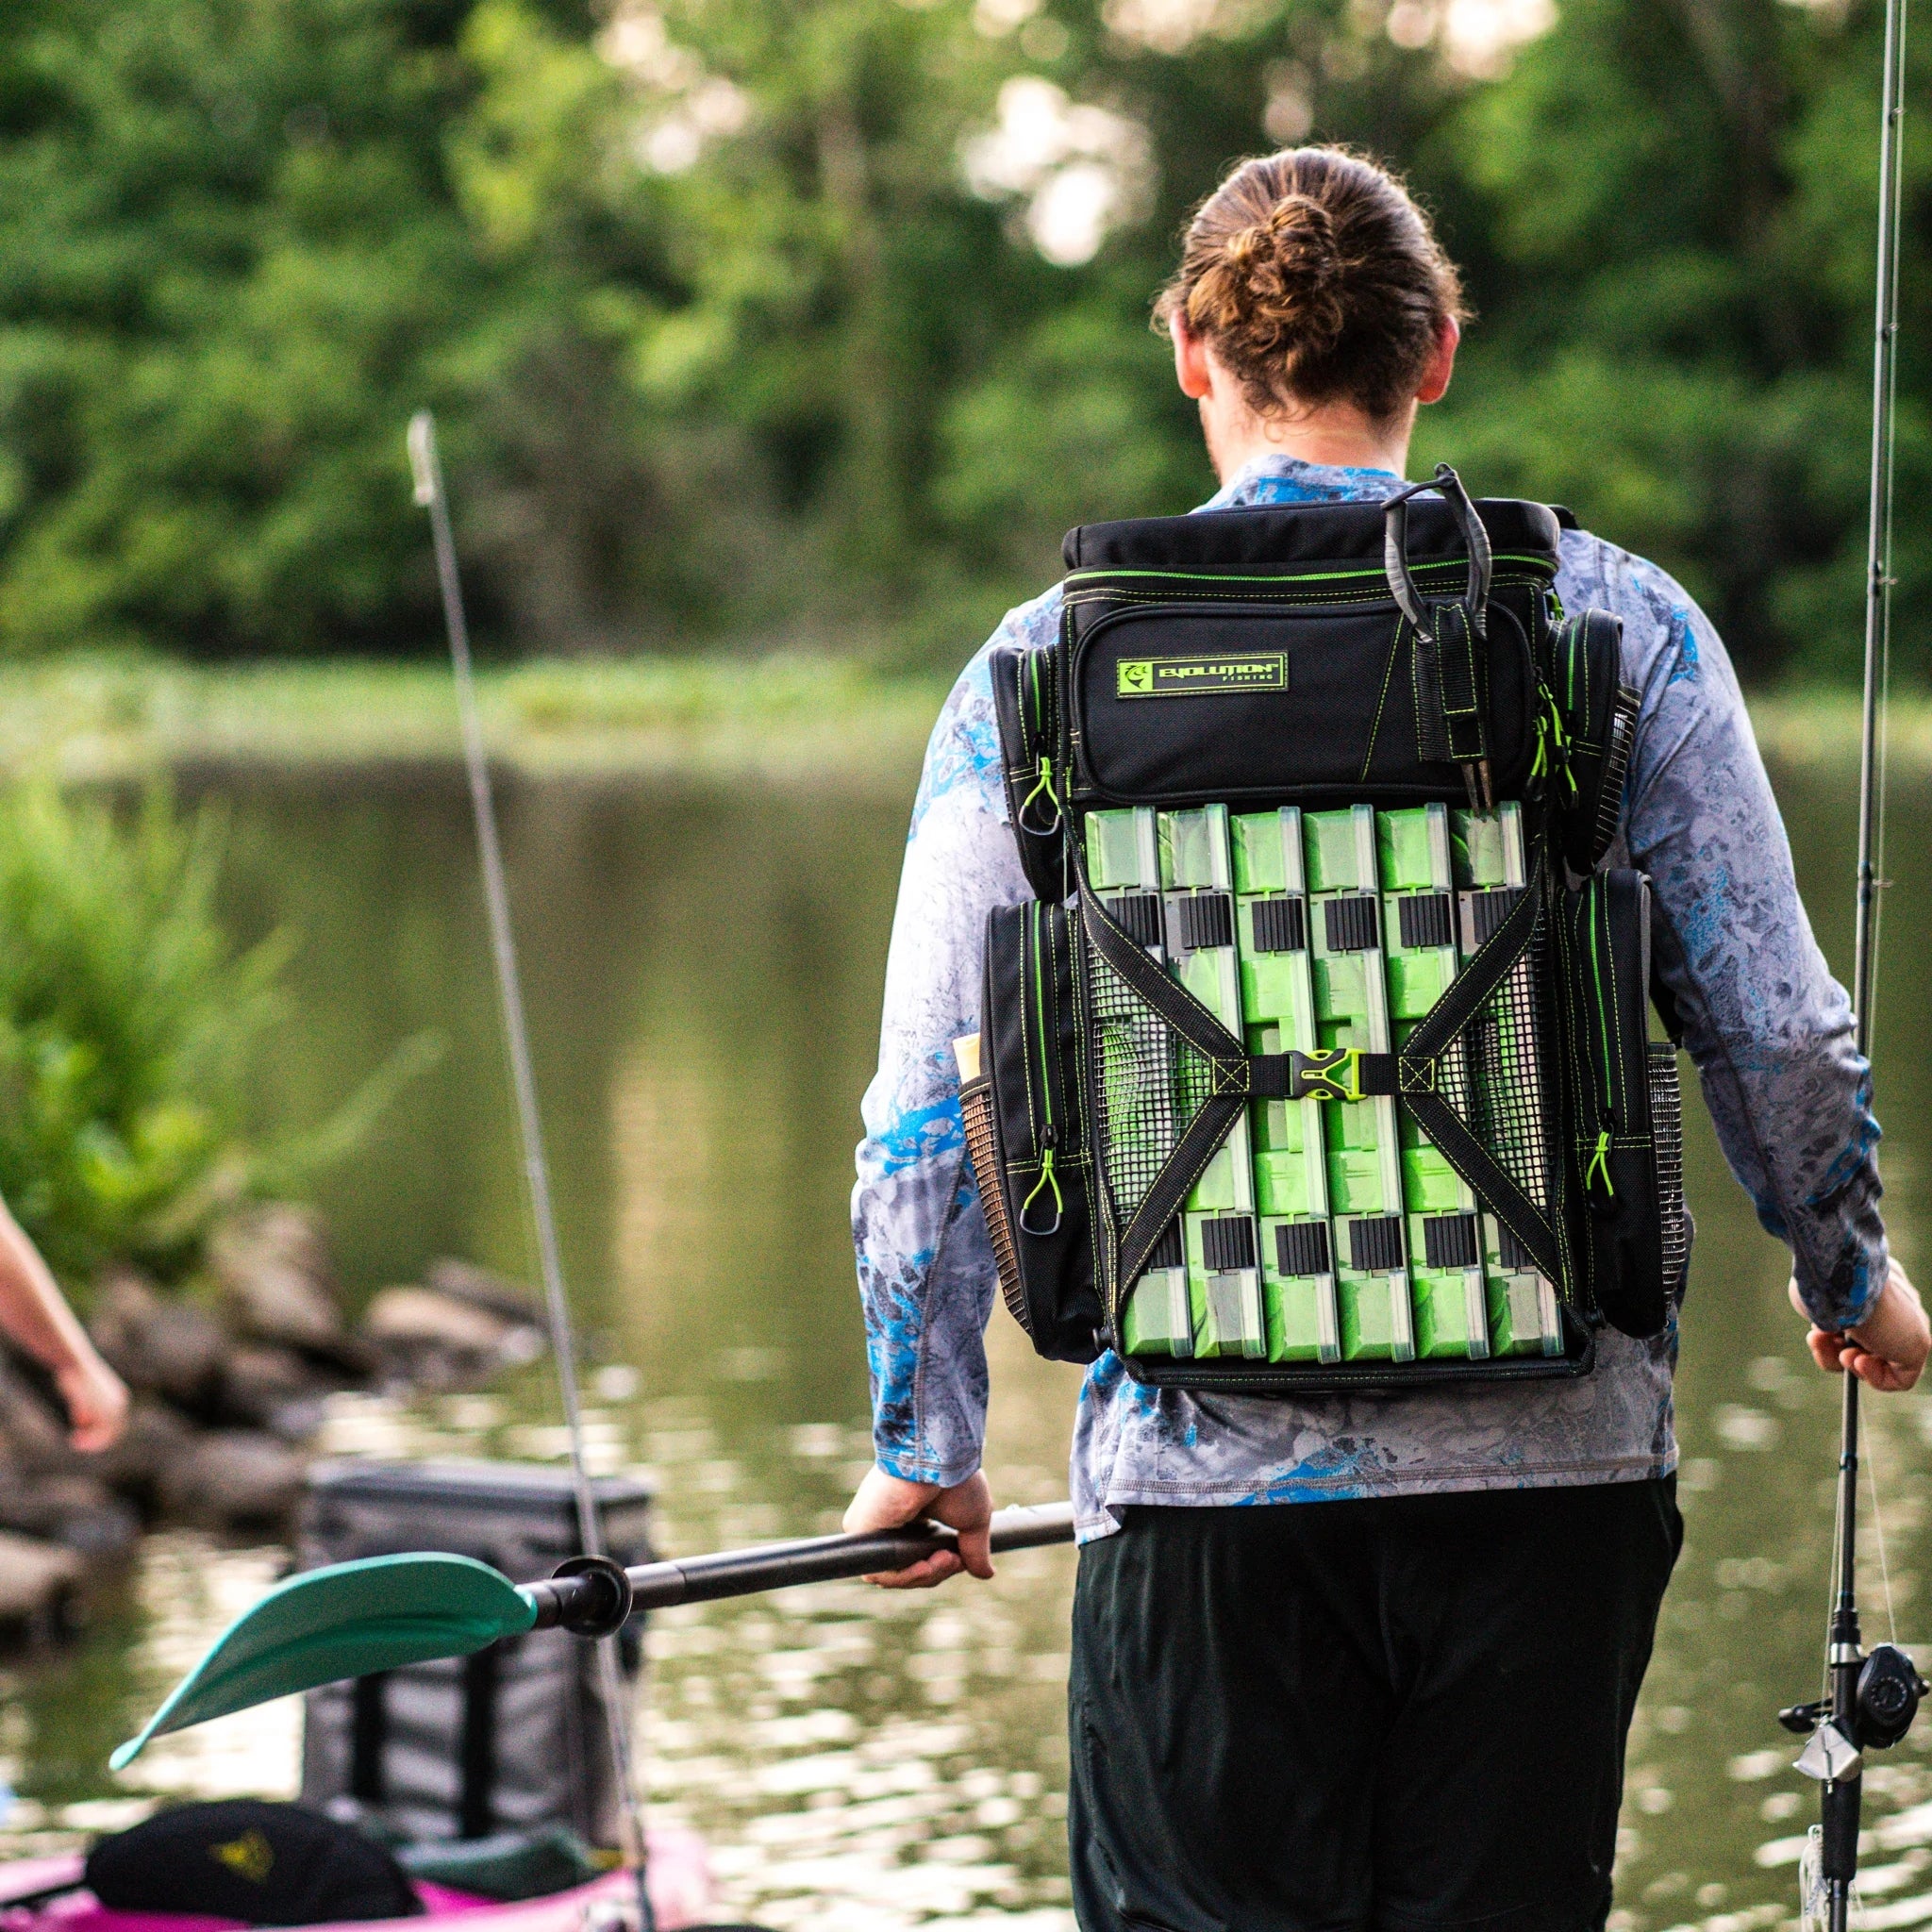 Evolution Outdoors' New Drift Series 3600 Tackle Sling Pack